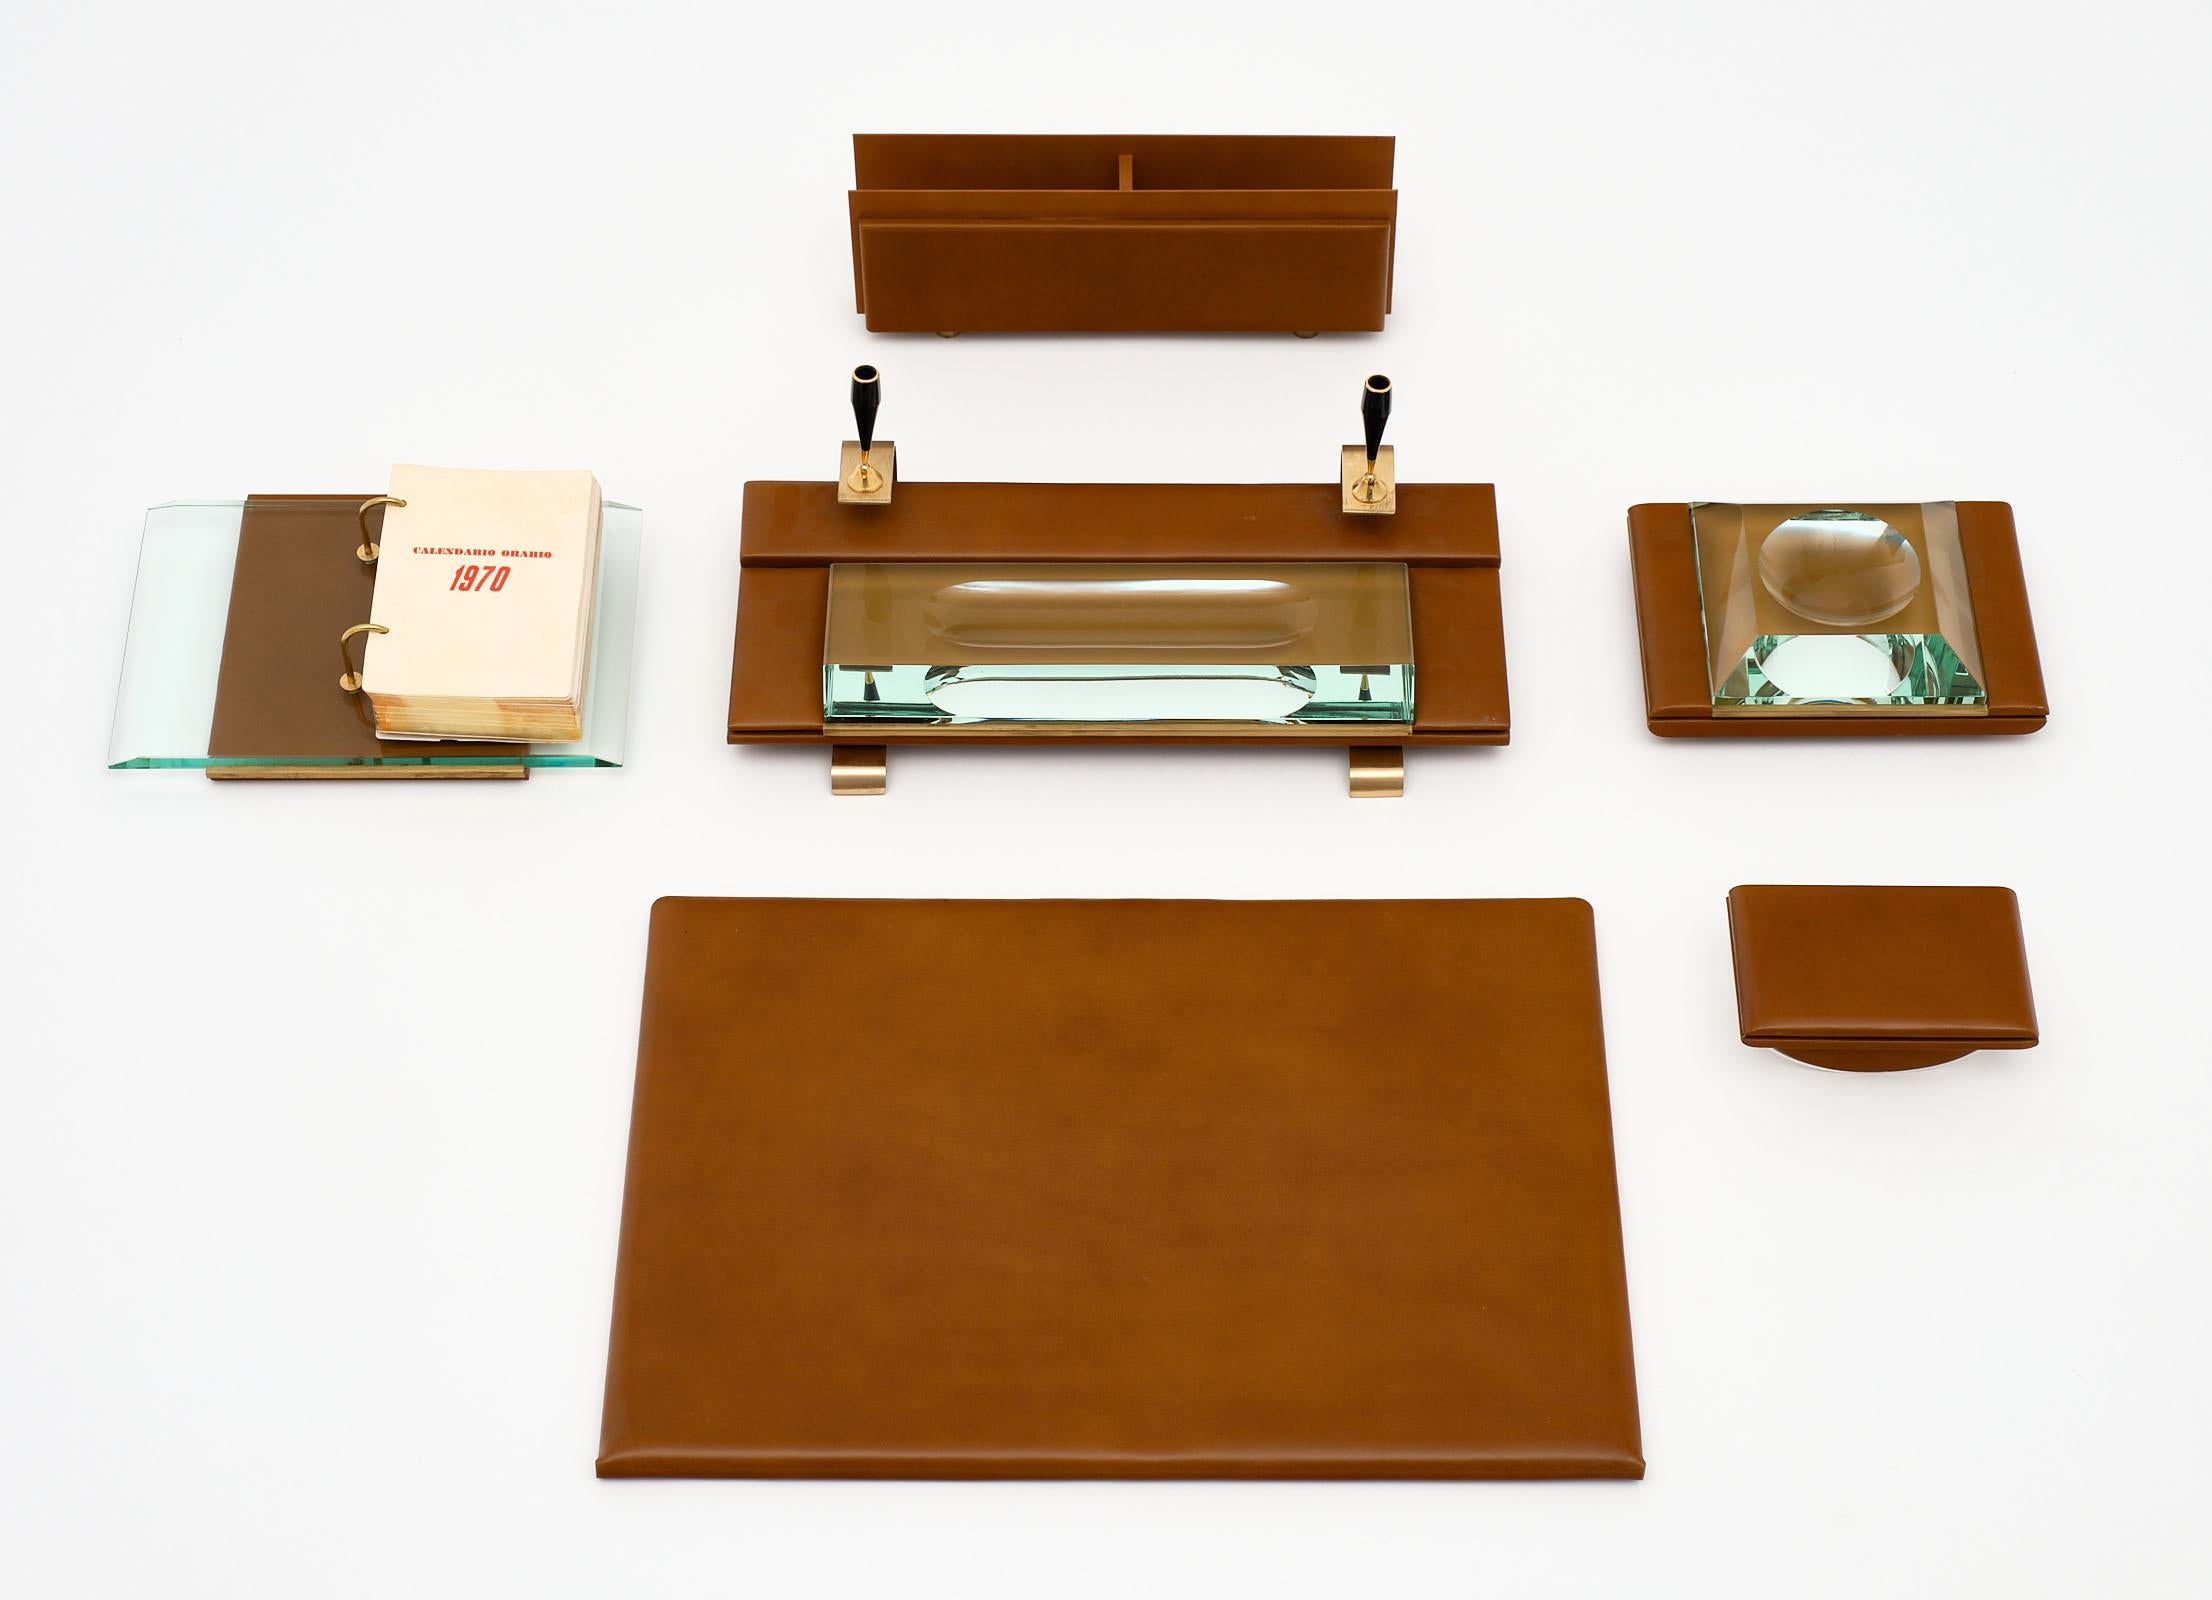 Four-piece 1970s Italian leather desk set - includes leather writing surface; letter holder; 1970s desk calendar; an ink blotter. The dimensions listed are for the writing surface. The letter holder is 12.75” by 3” by 4.5”. The ink blotter is 3.75”